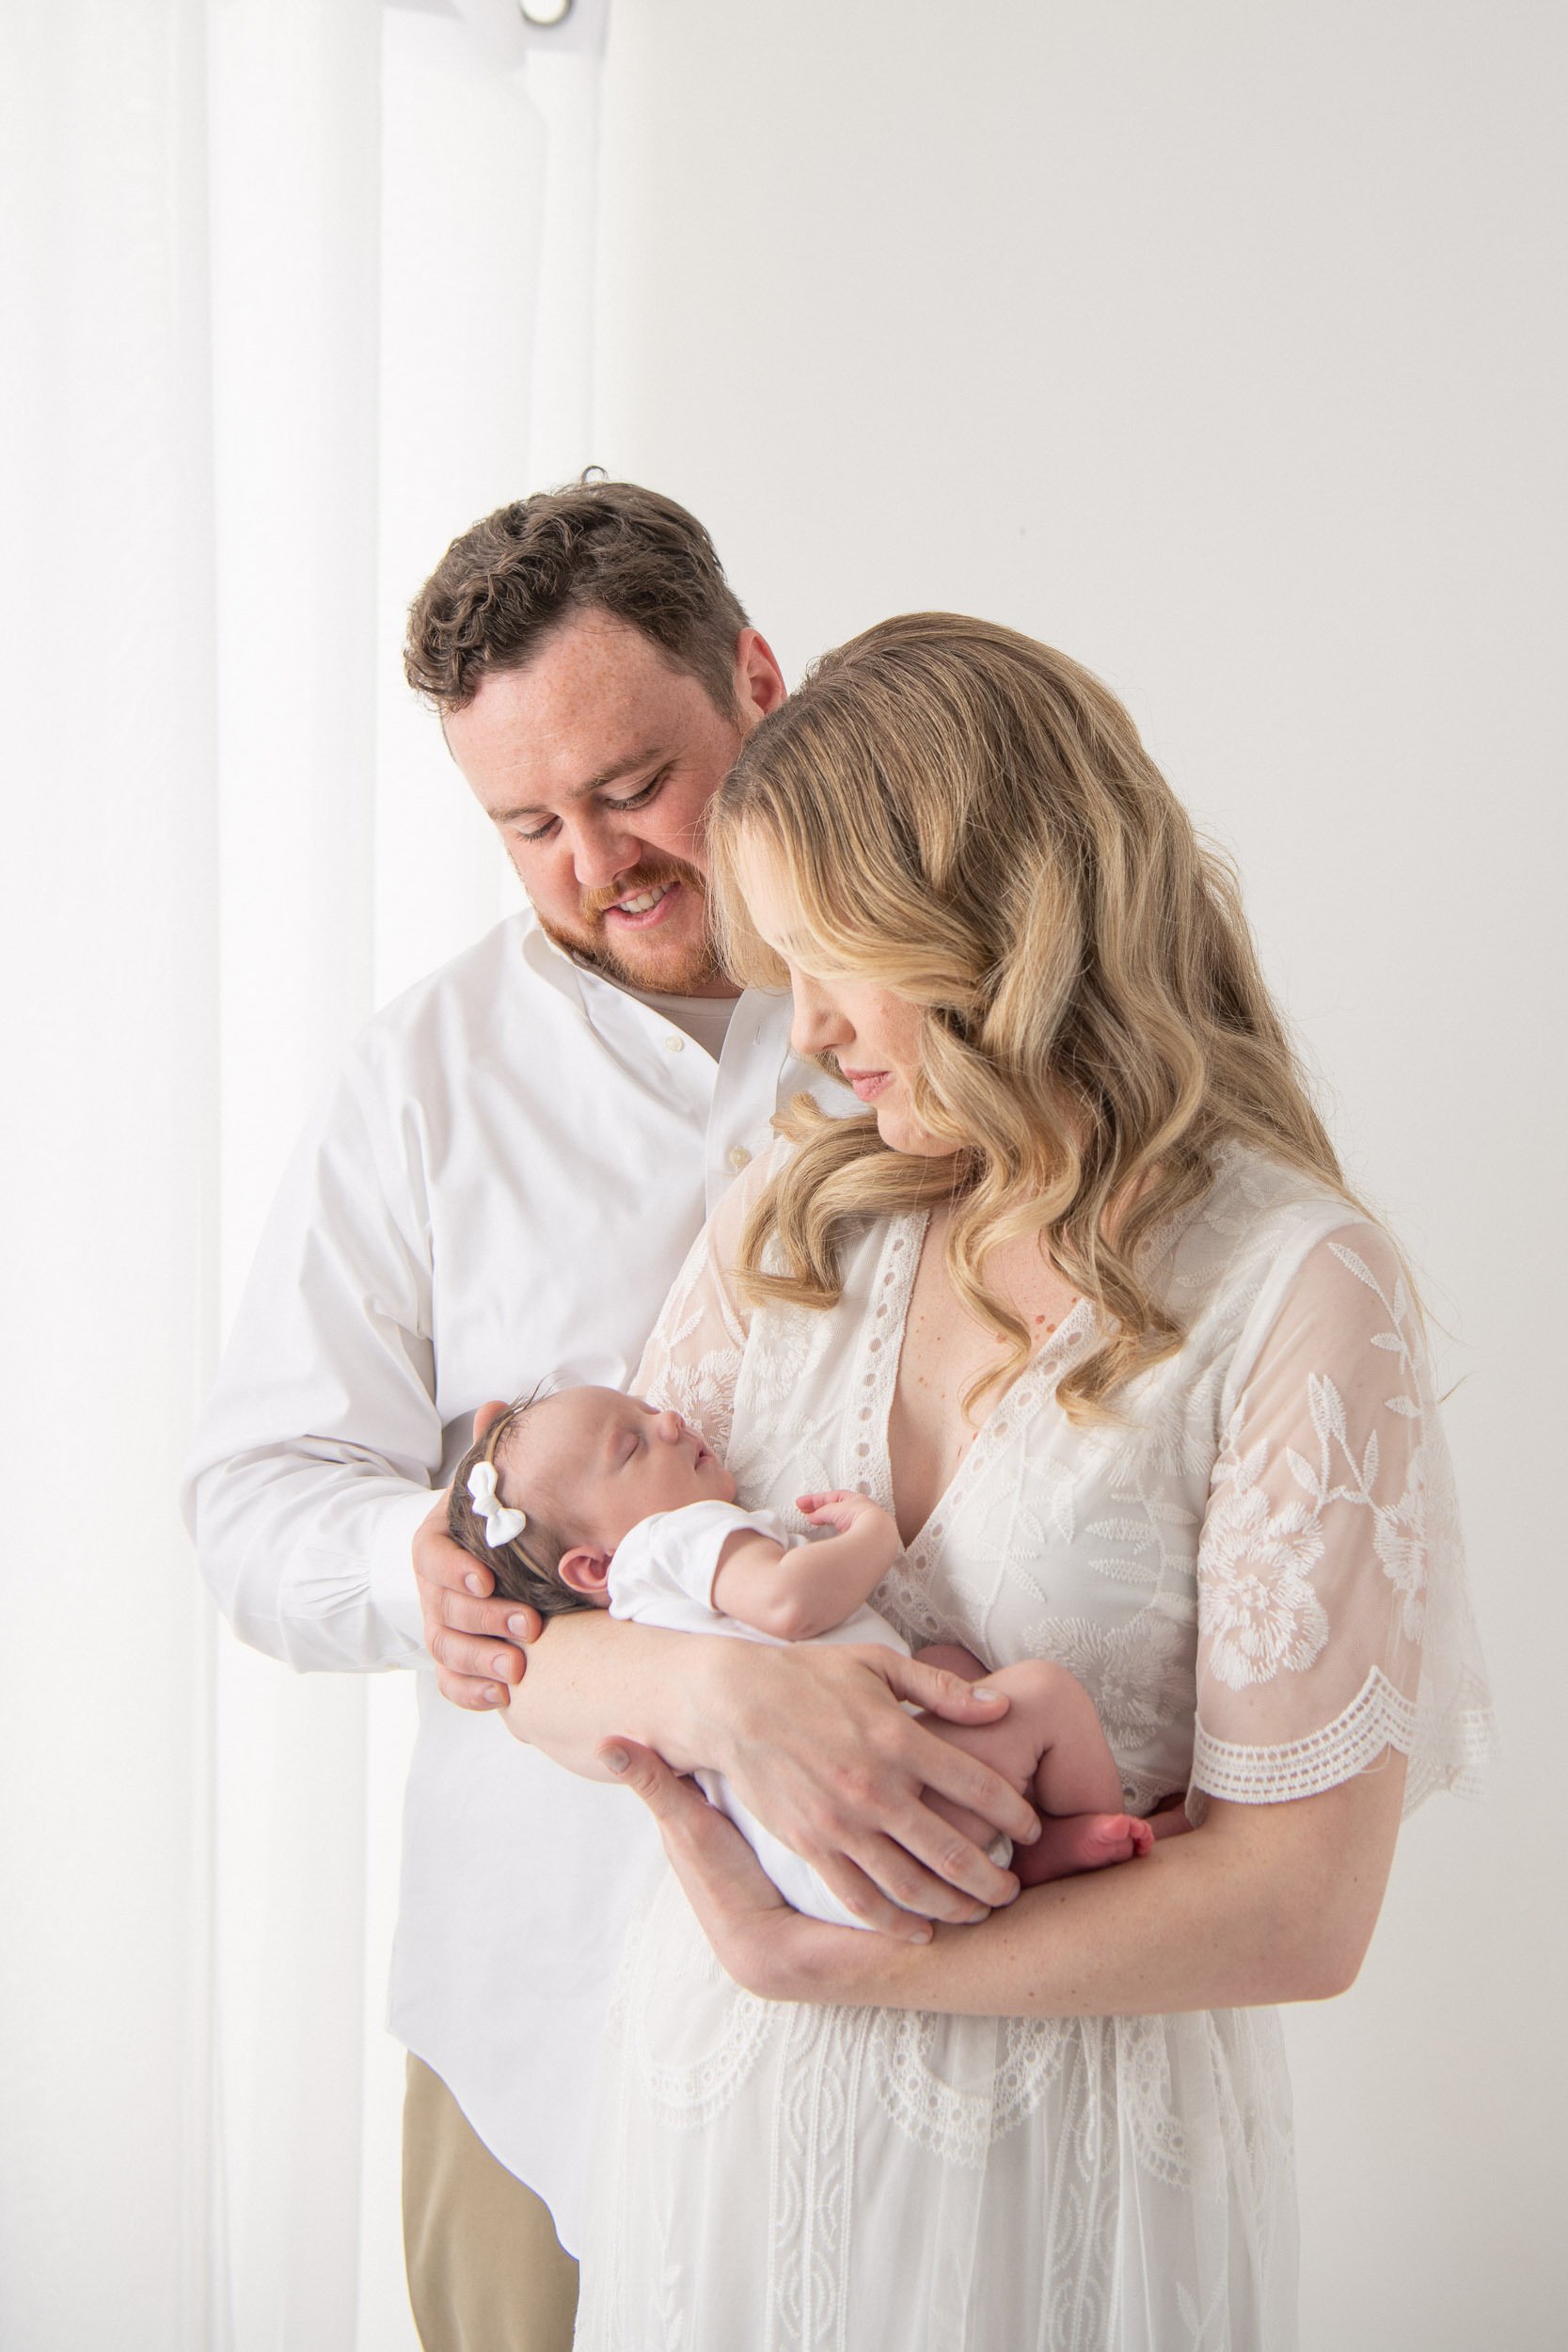  A portrait of a mother and father looking lovingly at their newborn baby by Nicole Hawkins Photography. family of three newborn family #NicoleHawkinsPhotography #NicoleHawkinsNewborns #StudioPhotography #NewYorkPhotographer #NJphotographers #newborn